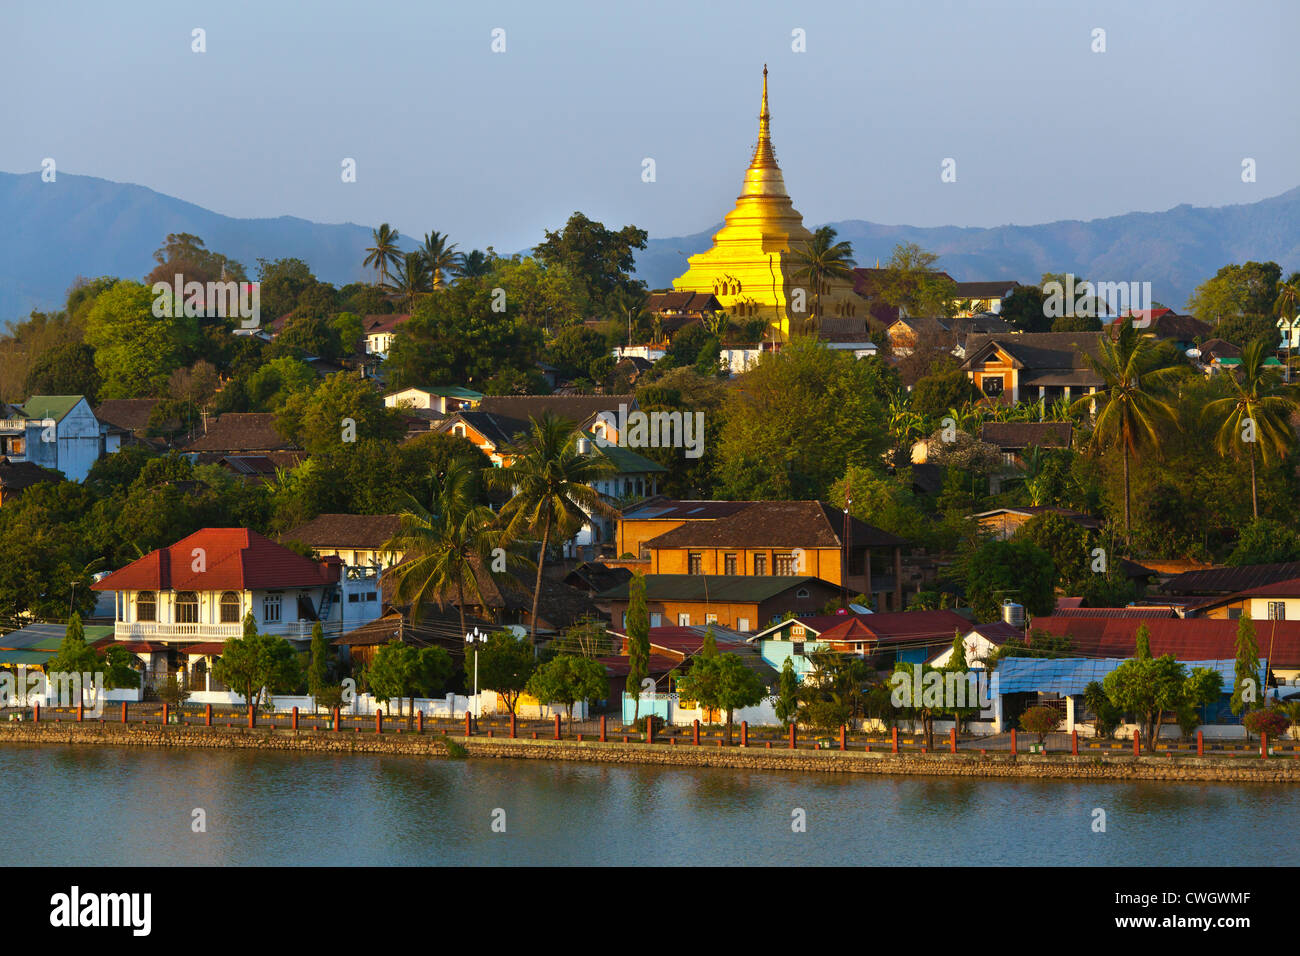 WAT JONG KHAM sits on a hill north of LAKE NAUNG TUNG the center of the town of KENGTUNG also know as KYAINGTONG - MYANMAR Stock Photo